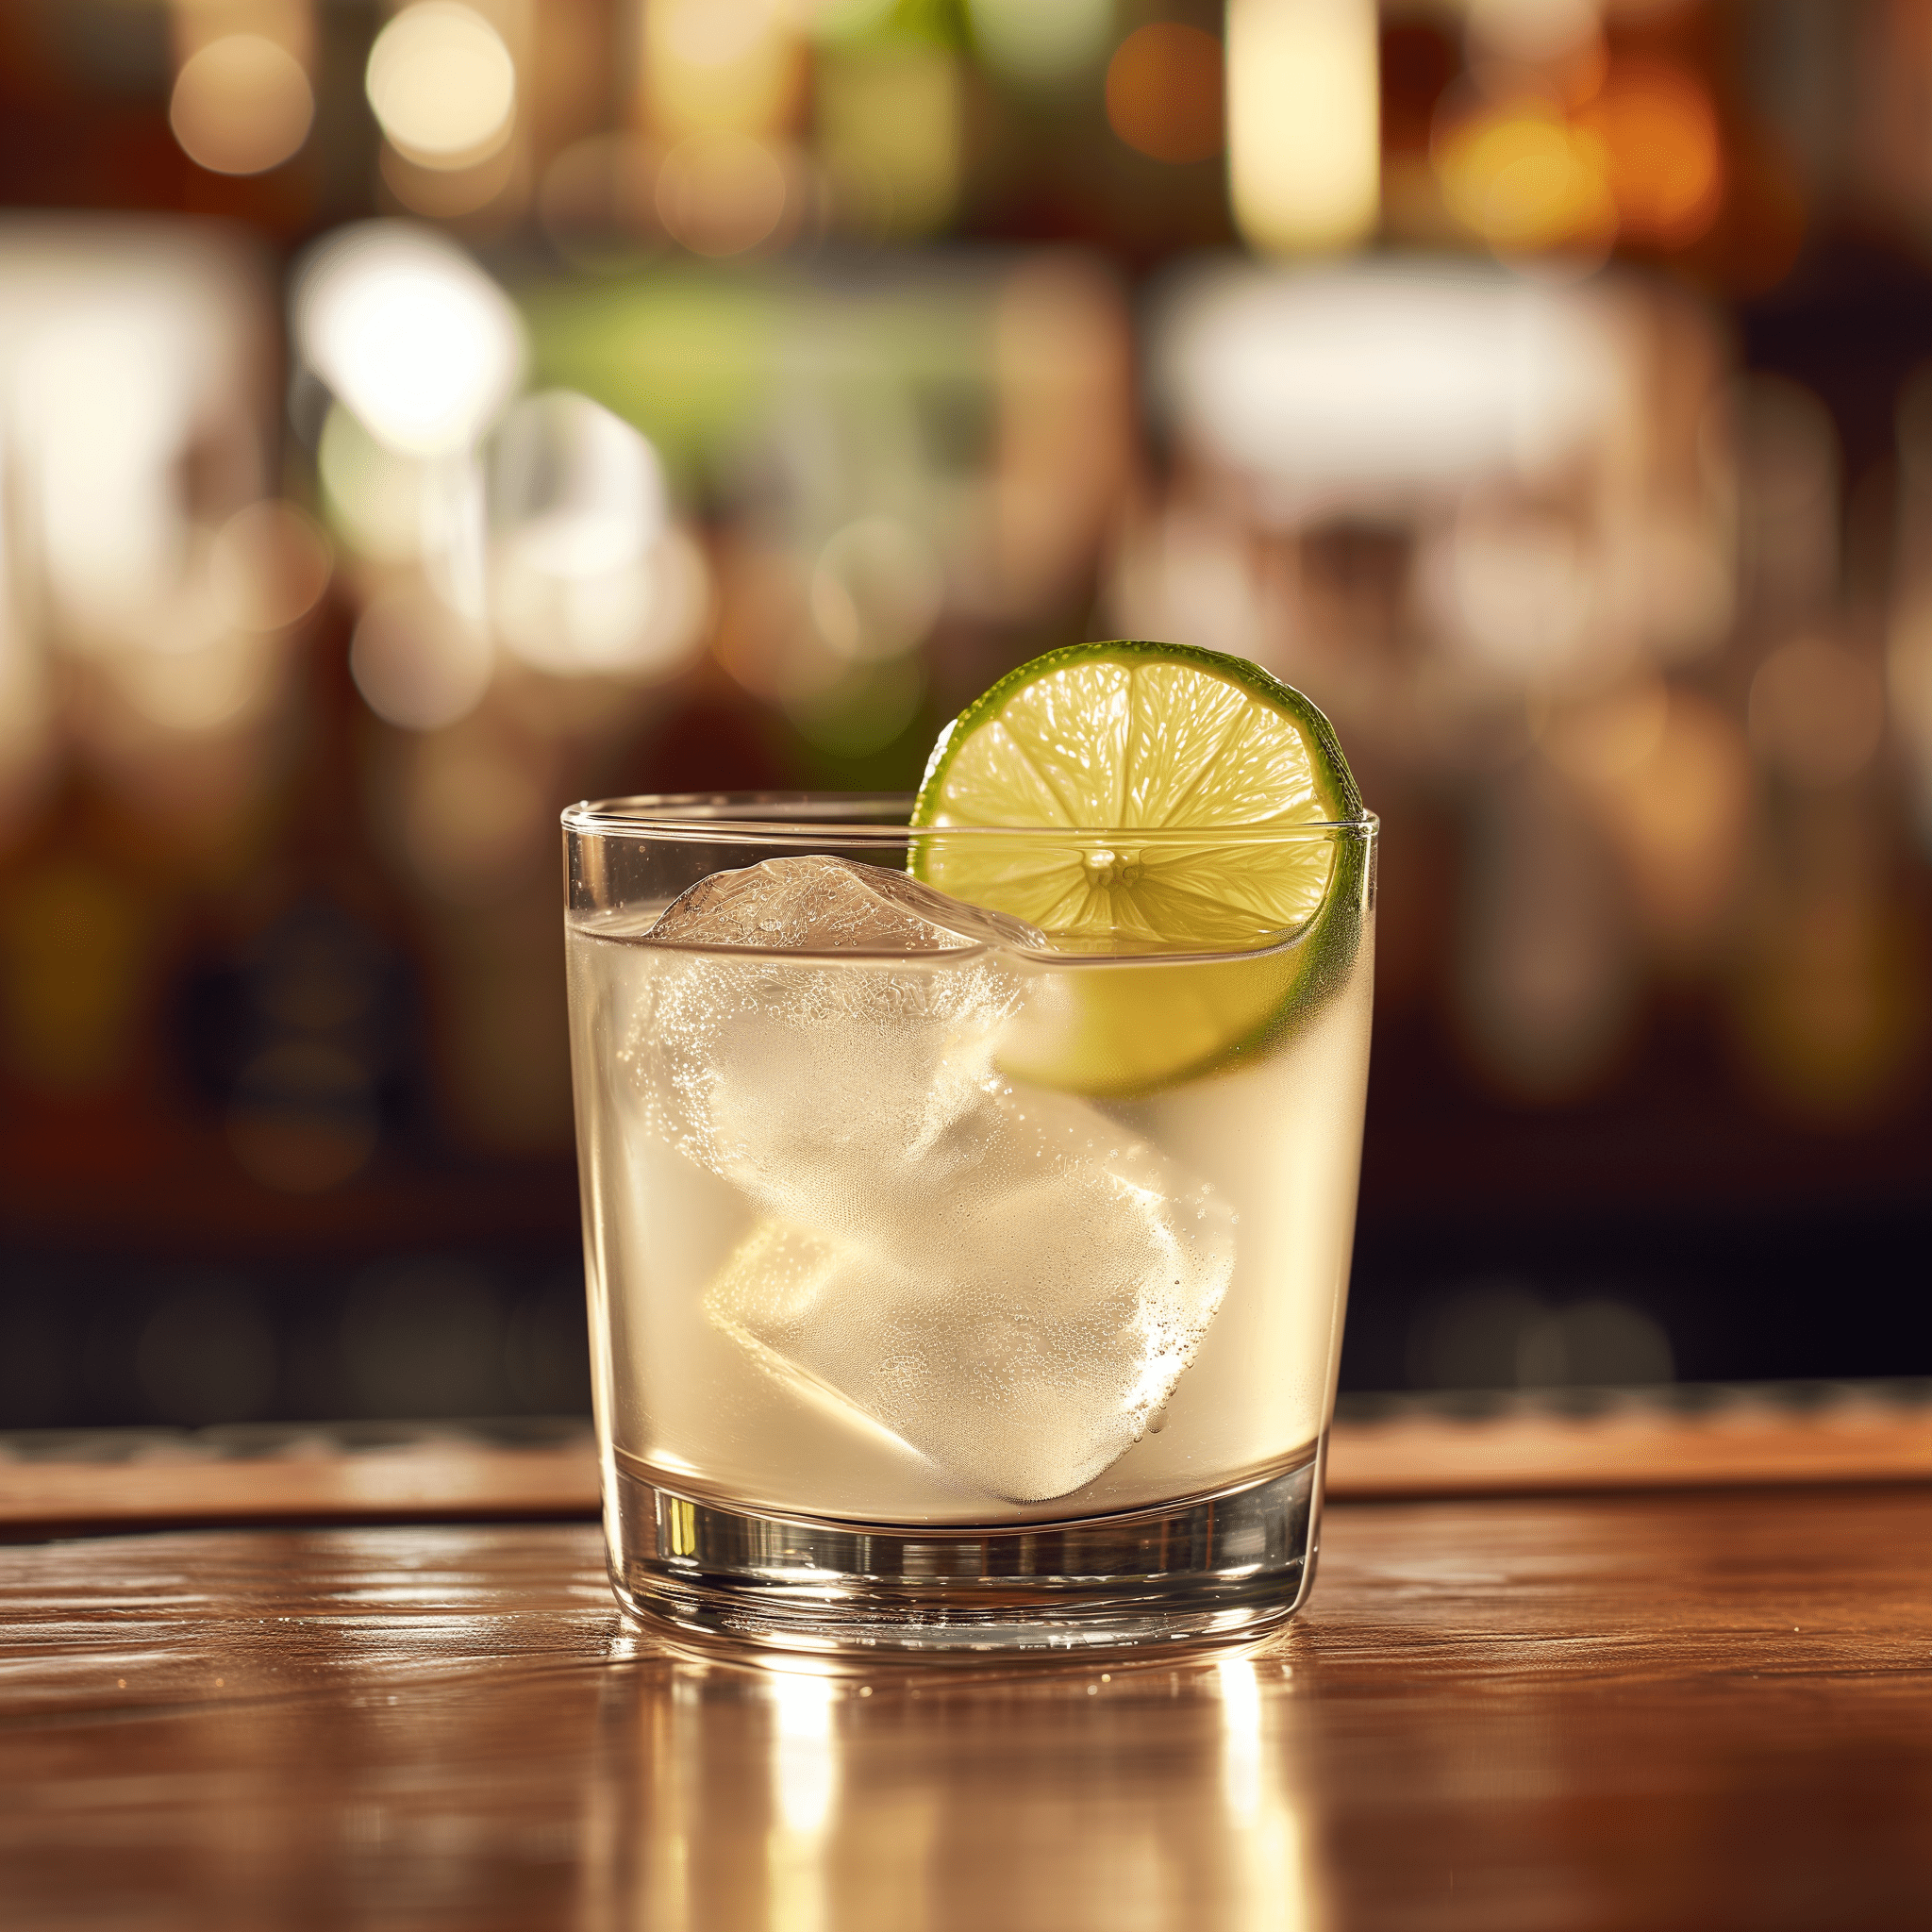 The Tequila Rickey has a crisp and refreshing taste with a balance of tartness from the lime and a subtle sweetness from the agave nectar. The blanco tequila provides a smooth, earthy base, while the soda water adds a fizzy lift.